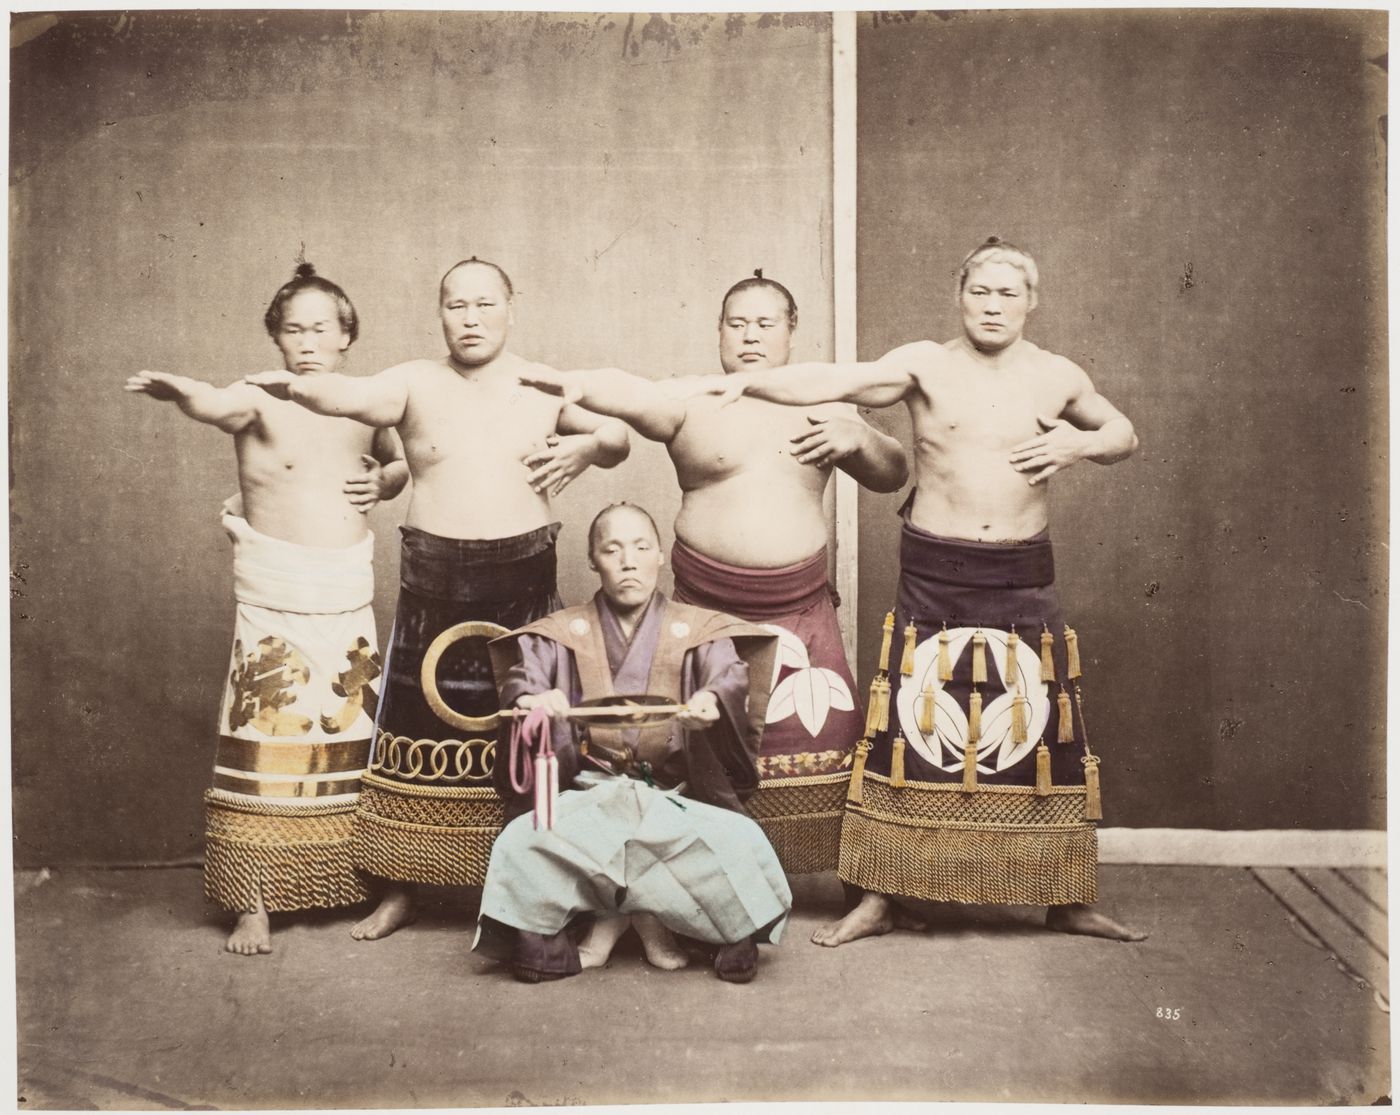 Group portrait of four sumo wrestlers and a gyoji [referee], Japan